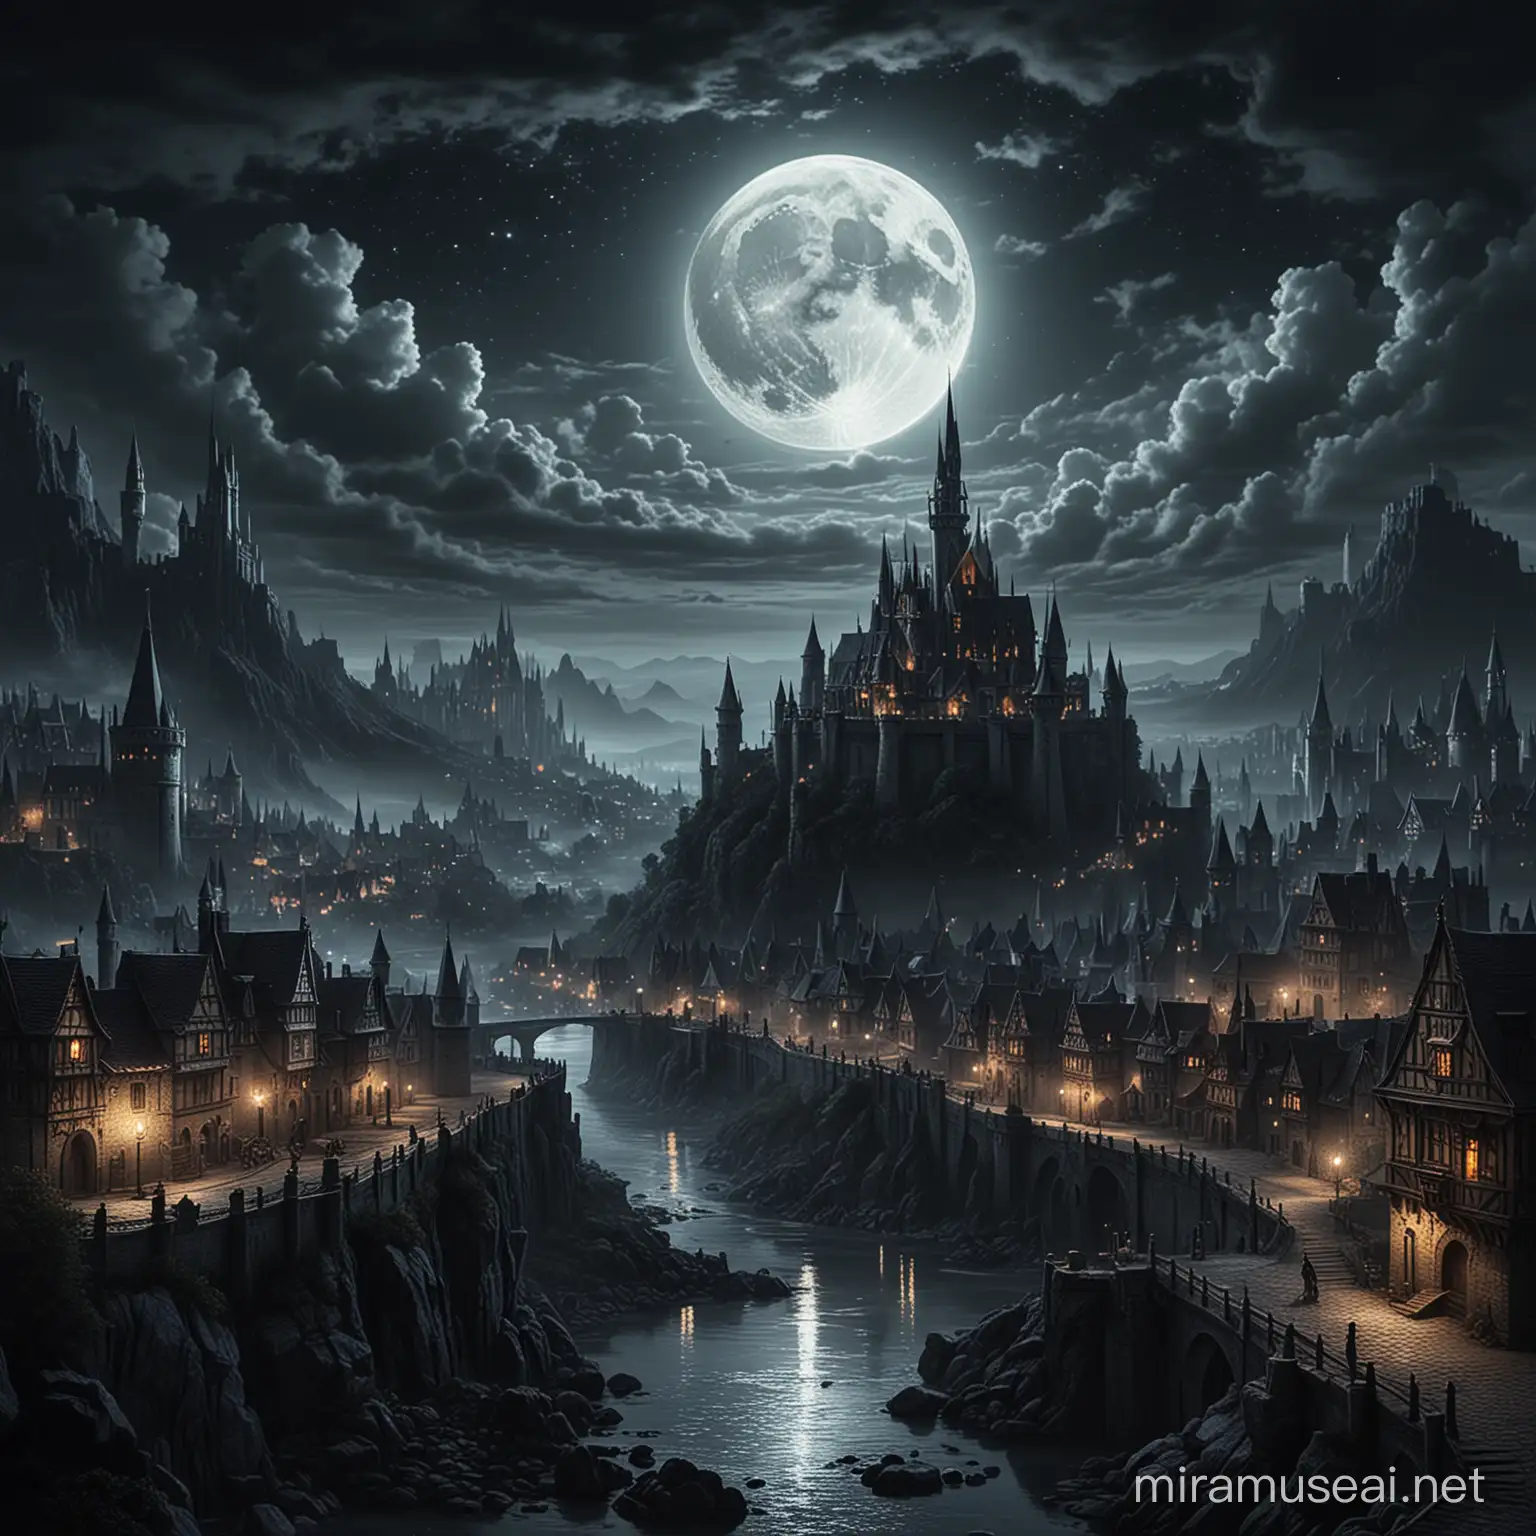 Enchanting Night View of a Medieval Fantasy City with Moonlit Castle